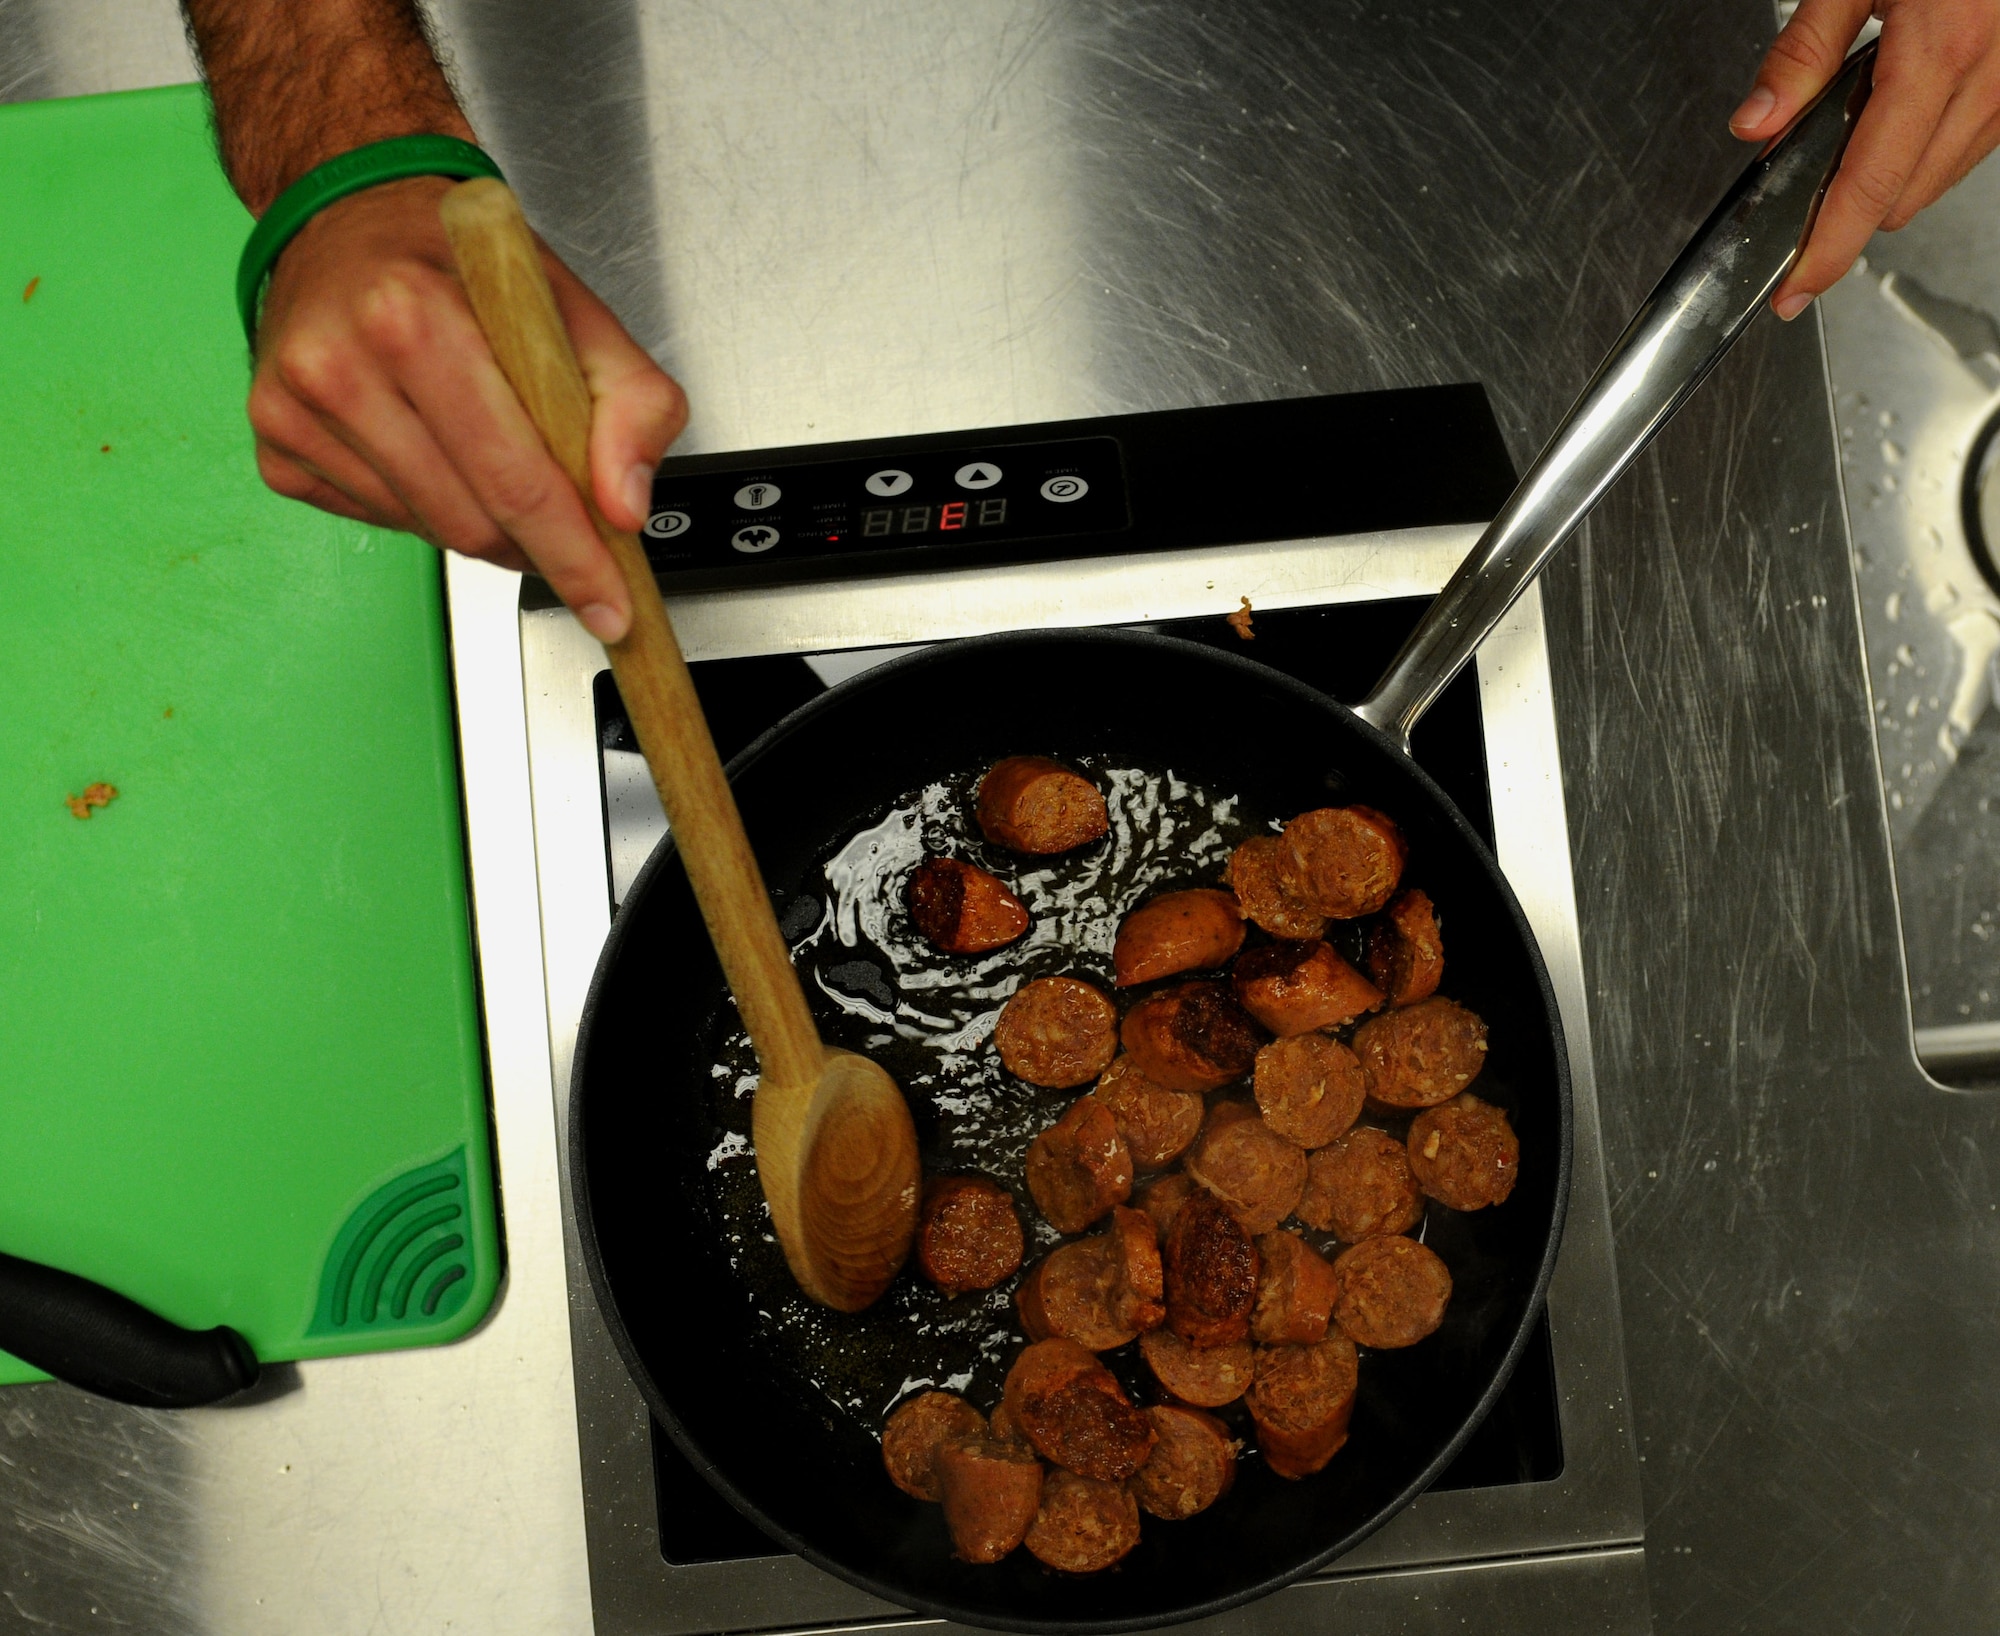 Andouille sausage cooks in a skillet before being added to a roux made of butter, onions, bell peppers, celery and garlic during a gumbo cooking class held by the 81st Force Support Squadron’s Single Airman Program Feb. 26, 2015, at the Mississippi Gulf Coast Community College, Perkinston, Miss. Traditionally served with andouille sausage and shrimp, gumbo’s versatility allows almost any meat to be added or substituted to the stew. (U.S. Air Force photo by Airman 1st Class Duncan McElroy) 